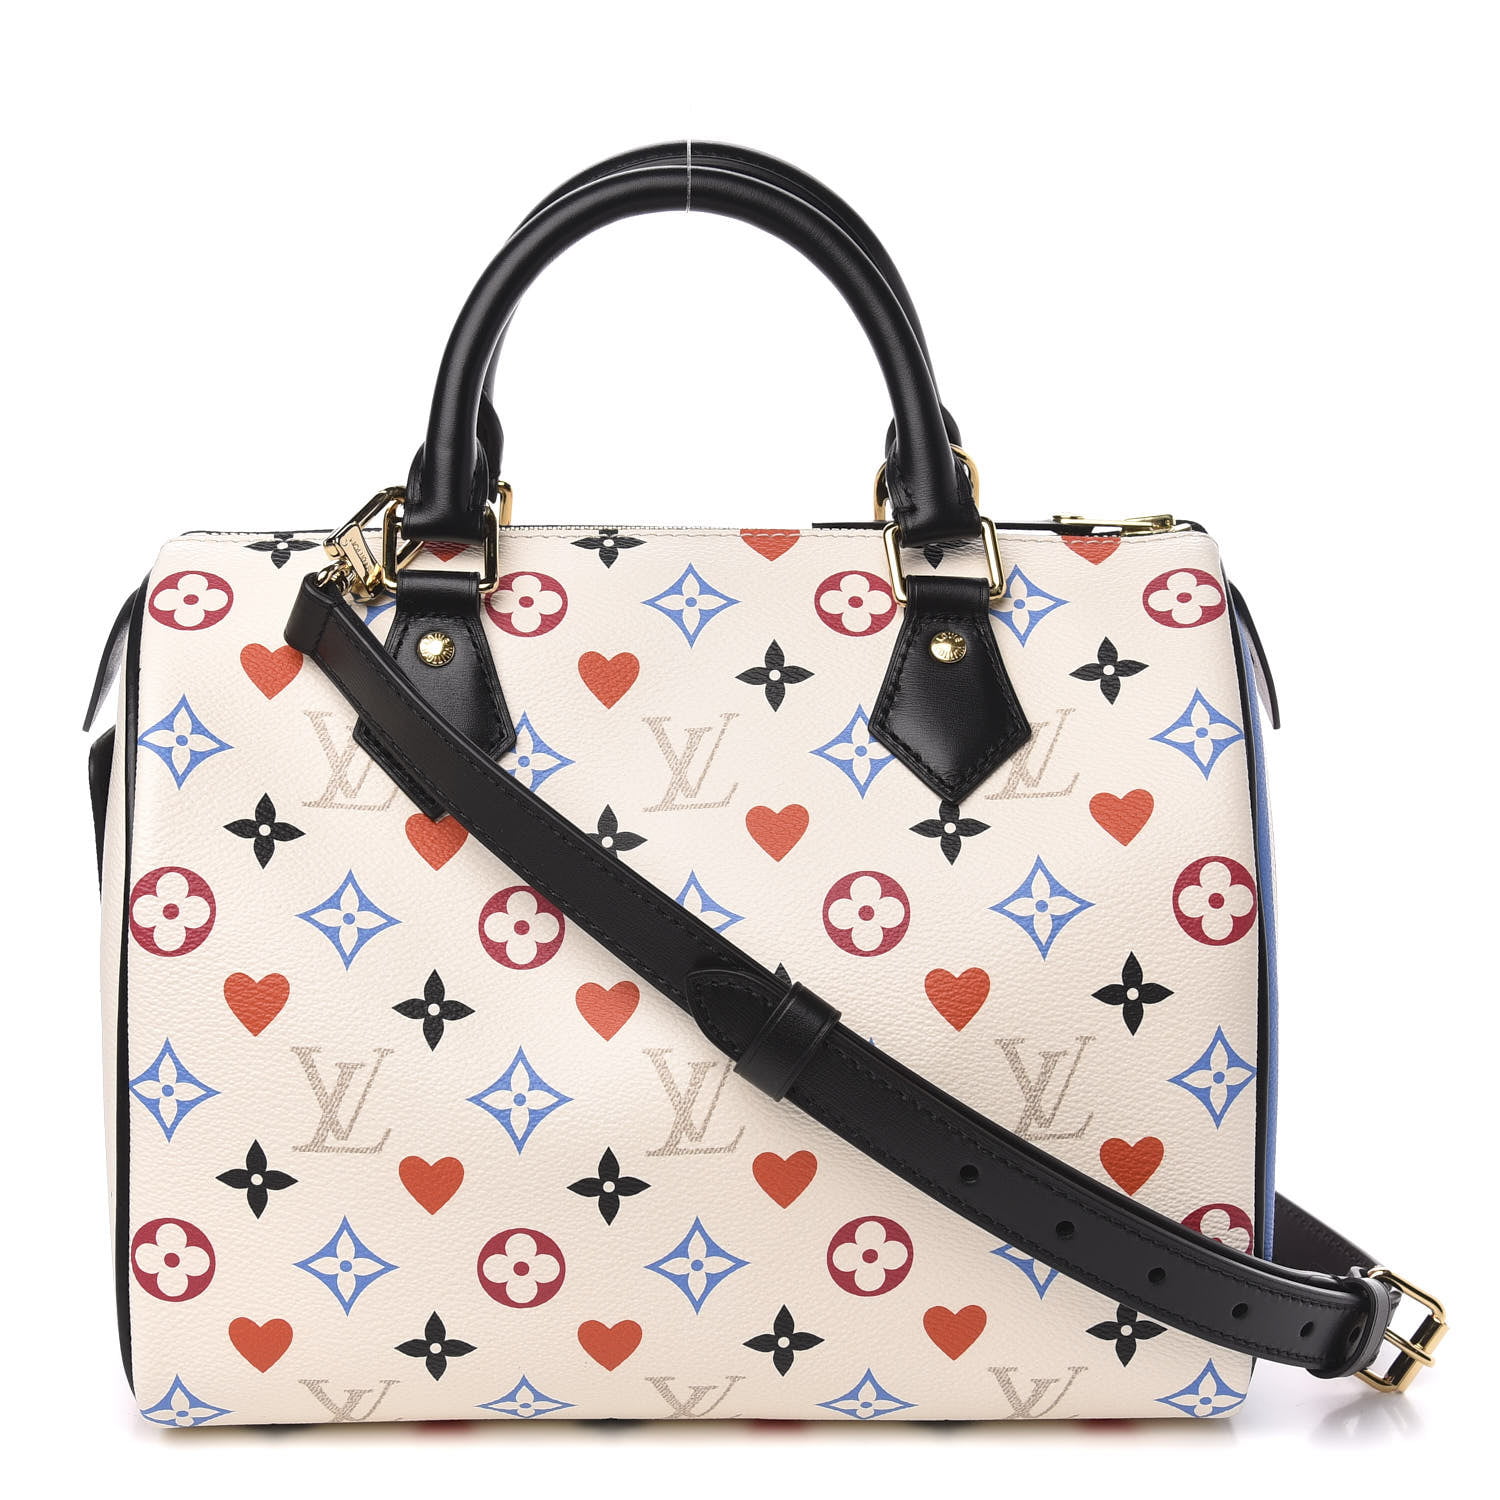 Vintage Chanel and Louis Vuitton Handbags Reach High Values on Rebag – WWD